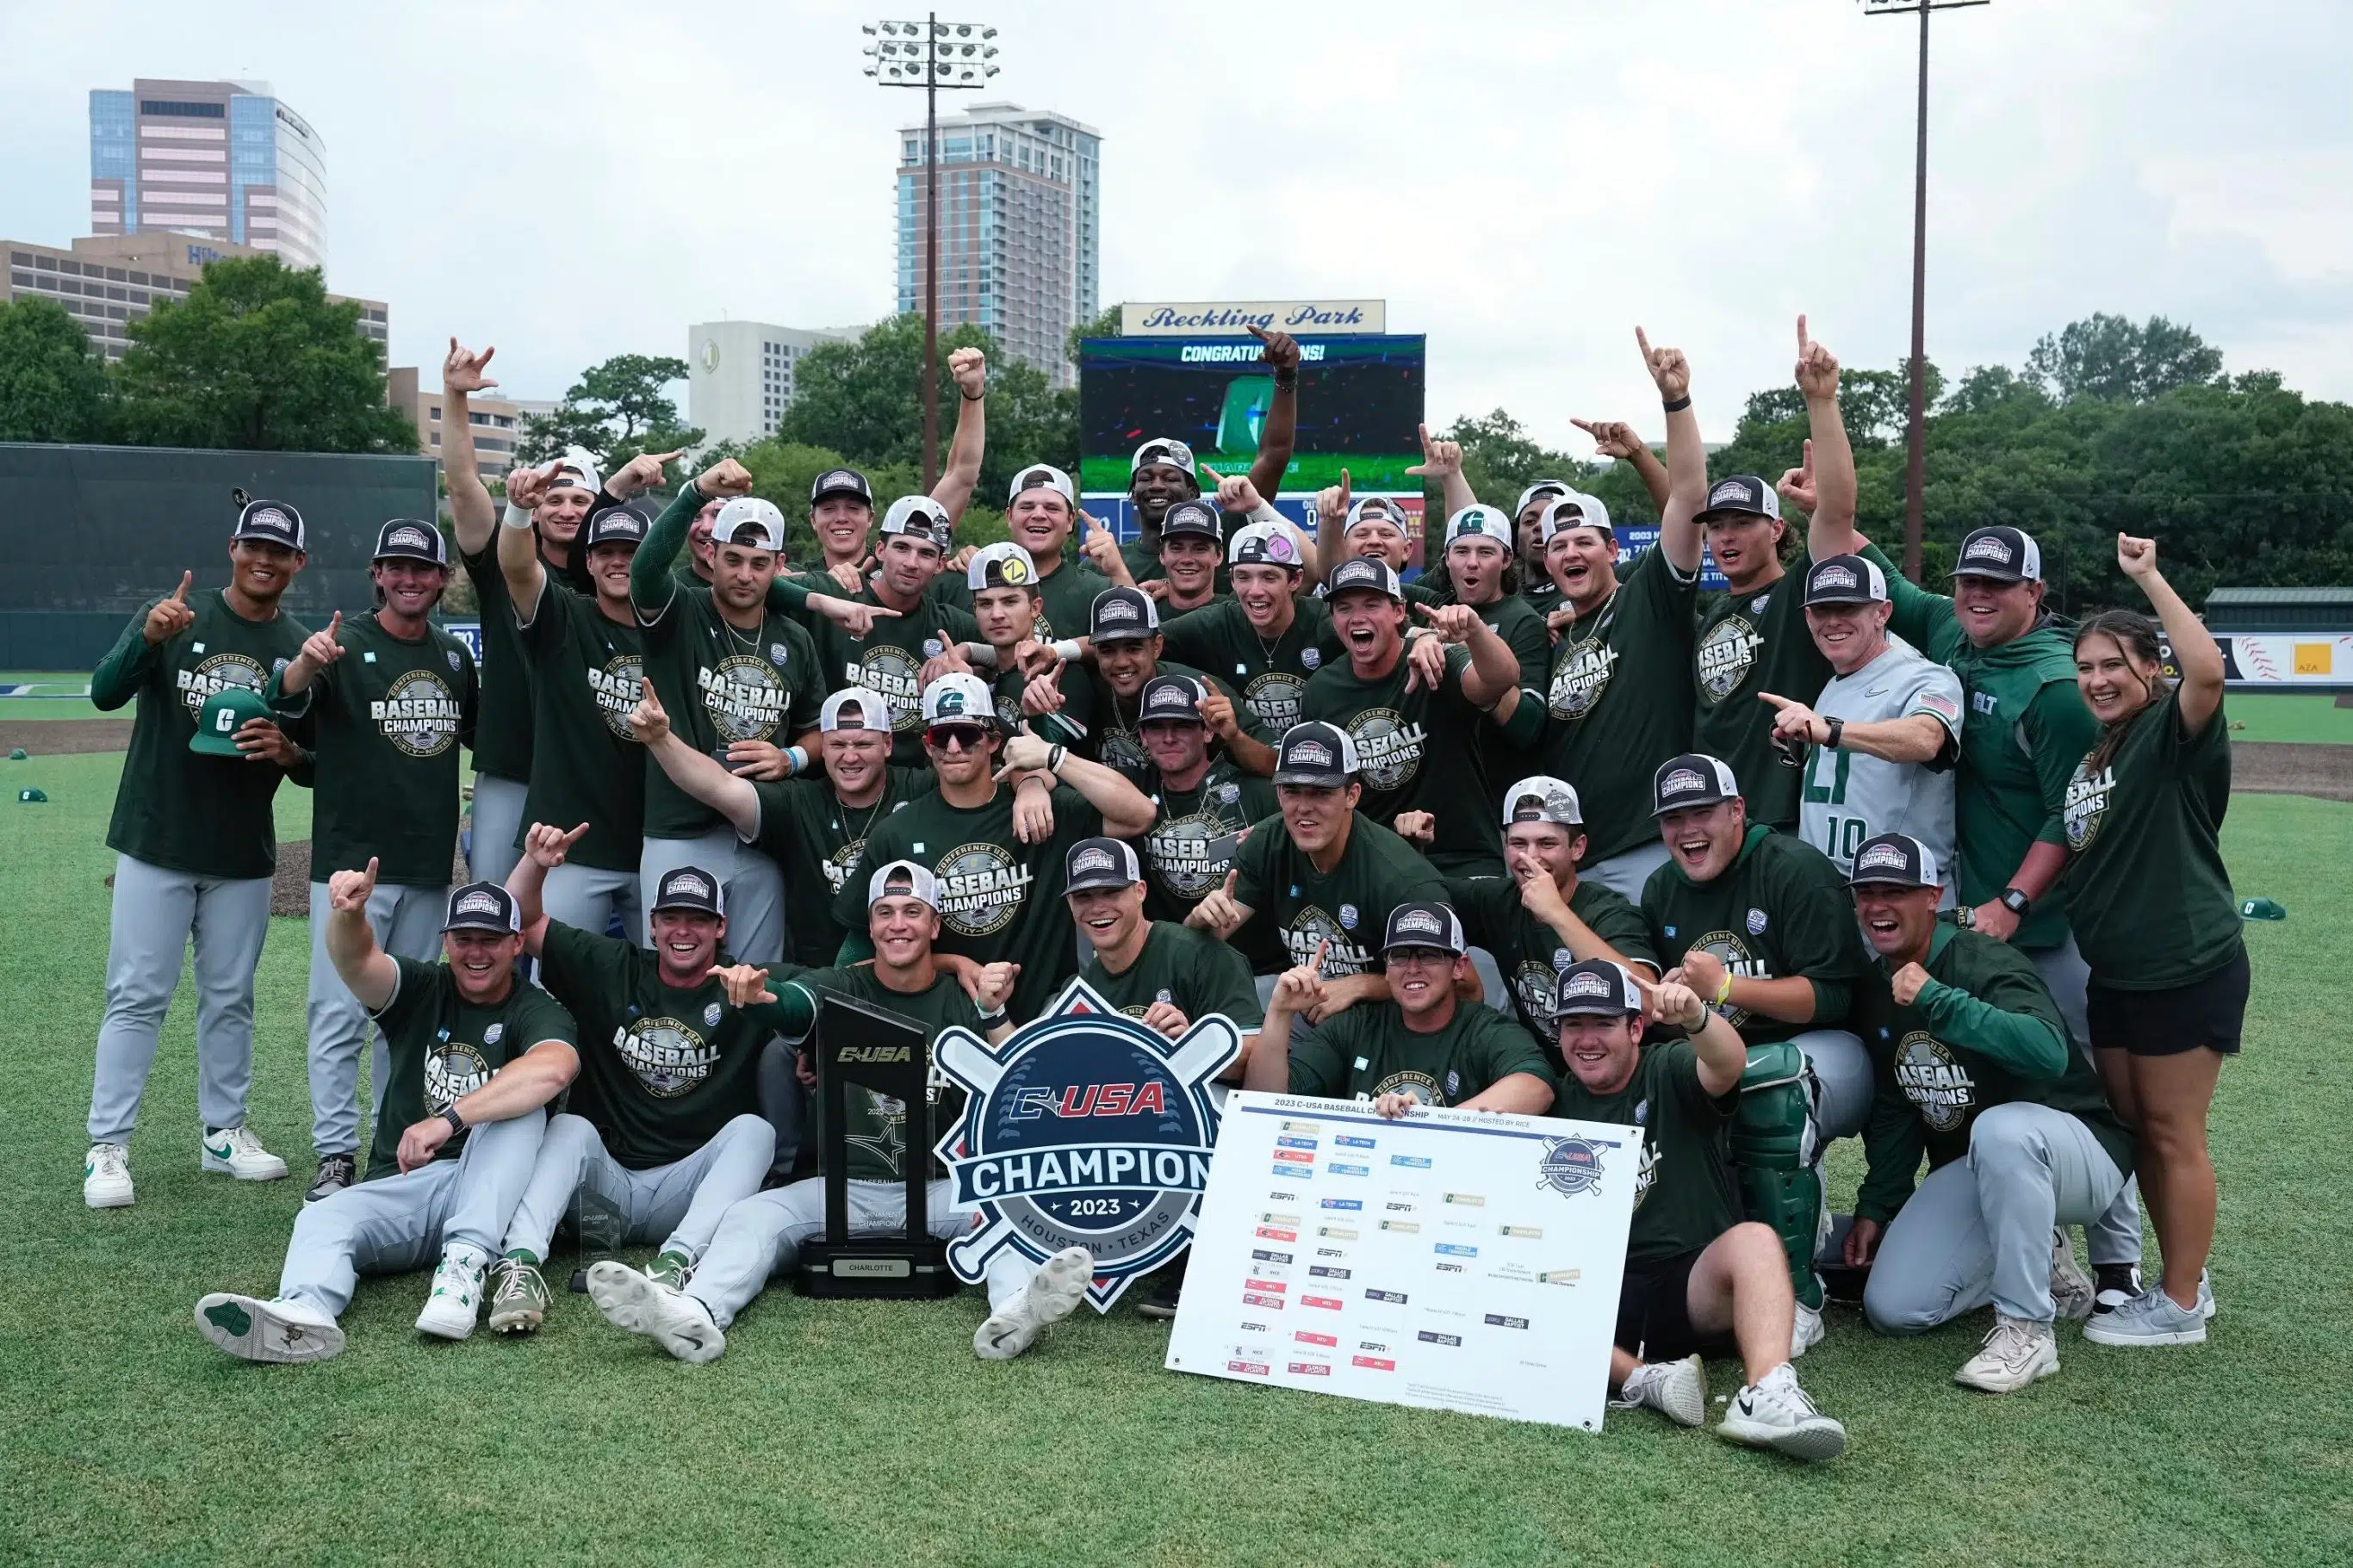 Charlotte baseball wins first CUSA title in program history